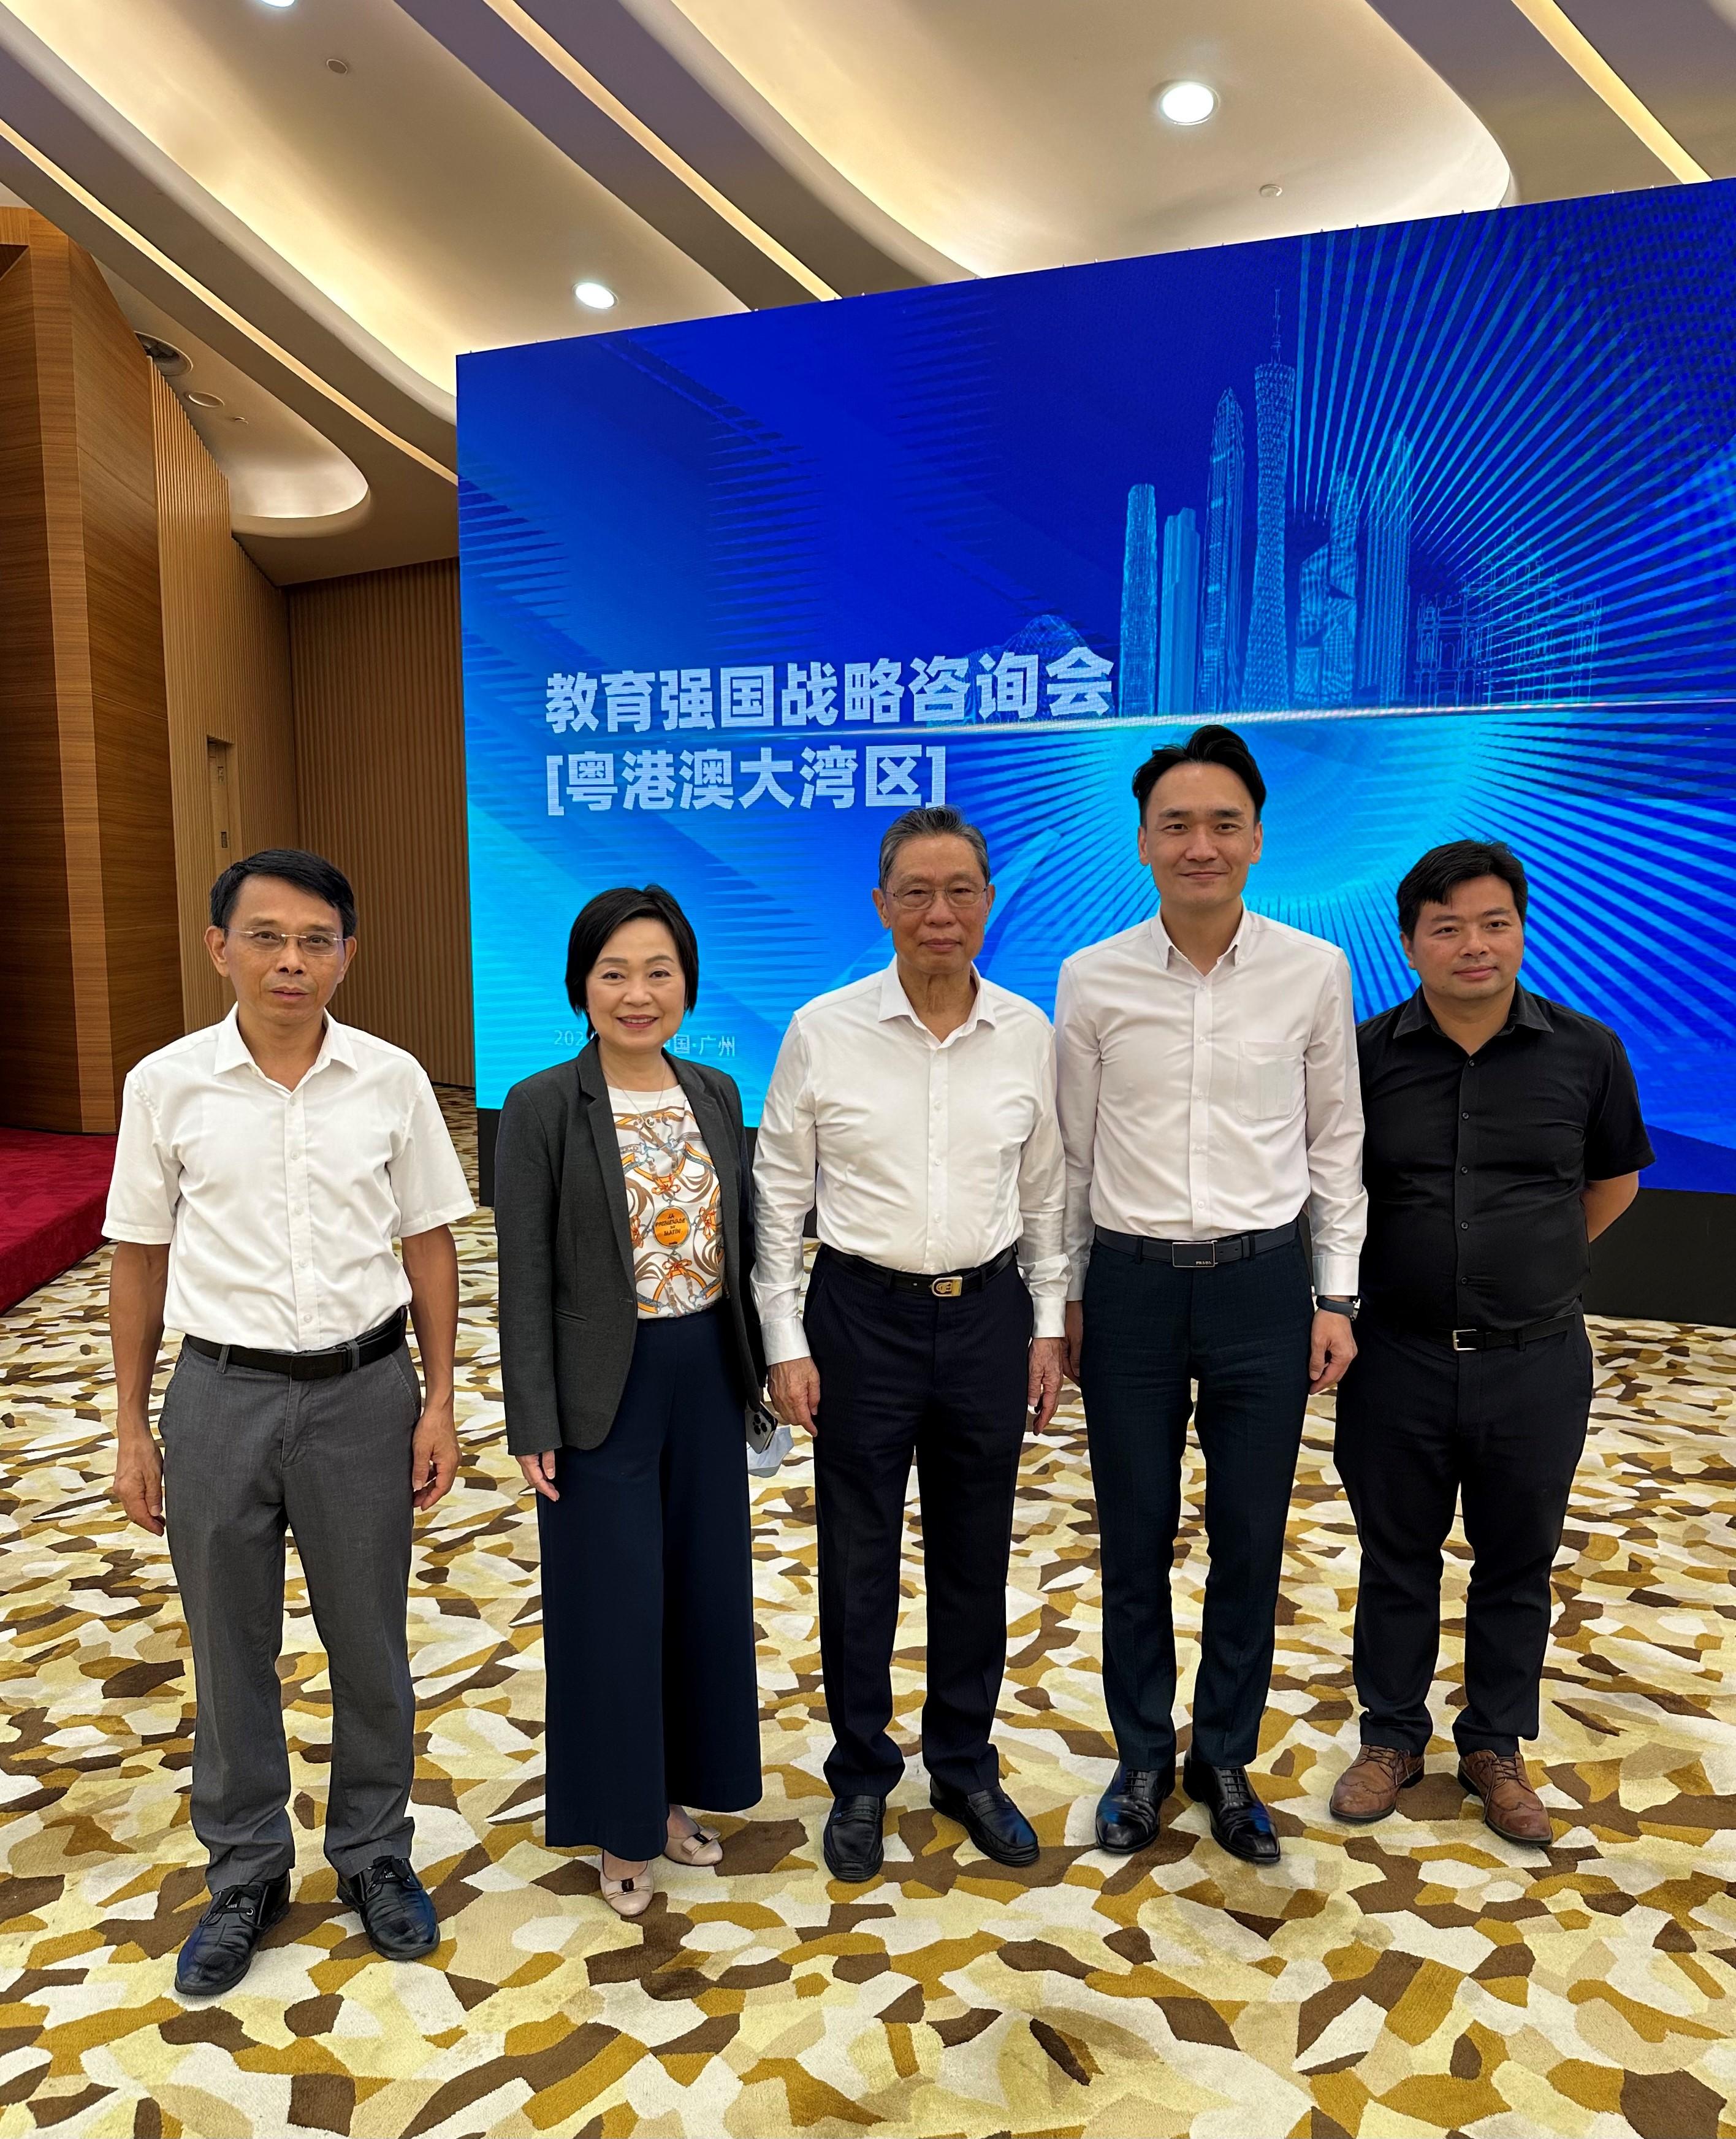 The Secretary for Education, Dr Choi Yuk-lin, attends the Strategy Consultation Conference on Building a Leading Country in Education (Guangdong-Hong Kong-Macao Greater Bay Area) co-organised by the Ministry of Education and the Guangdong Provincial Government in Guangzhou today (July 22). Photo shows (from left) the First-level Inspector of the Department of Education of Guangdong Province, Mr Zhu Chaohua; Dr Choi; Academician of the Chinese Academy of Engineering, Professor Zhong Nanshan; the Director of the Education and Youth Affairs Bureau of Macao, Mr Kong Chi-meng; and the Deputy Director of the Office of Hong Kong, Macao, and Taiwan Affairs of the Ministry of Education, Mr Shu Gangbo, before the conference.